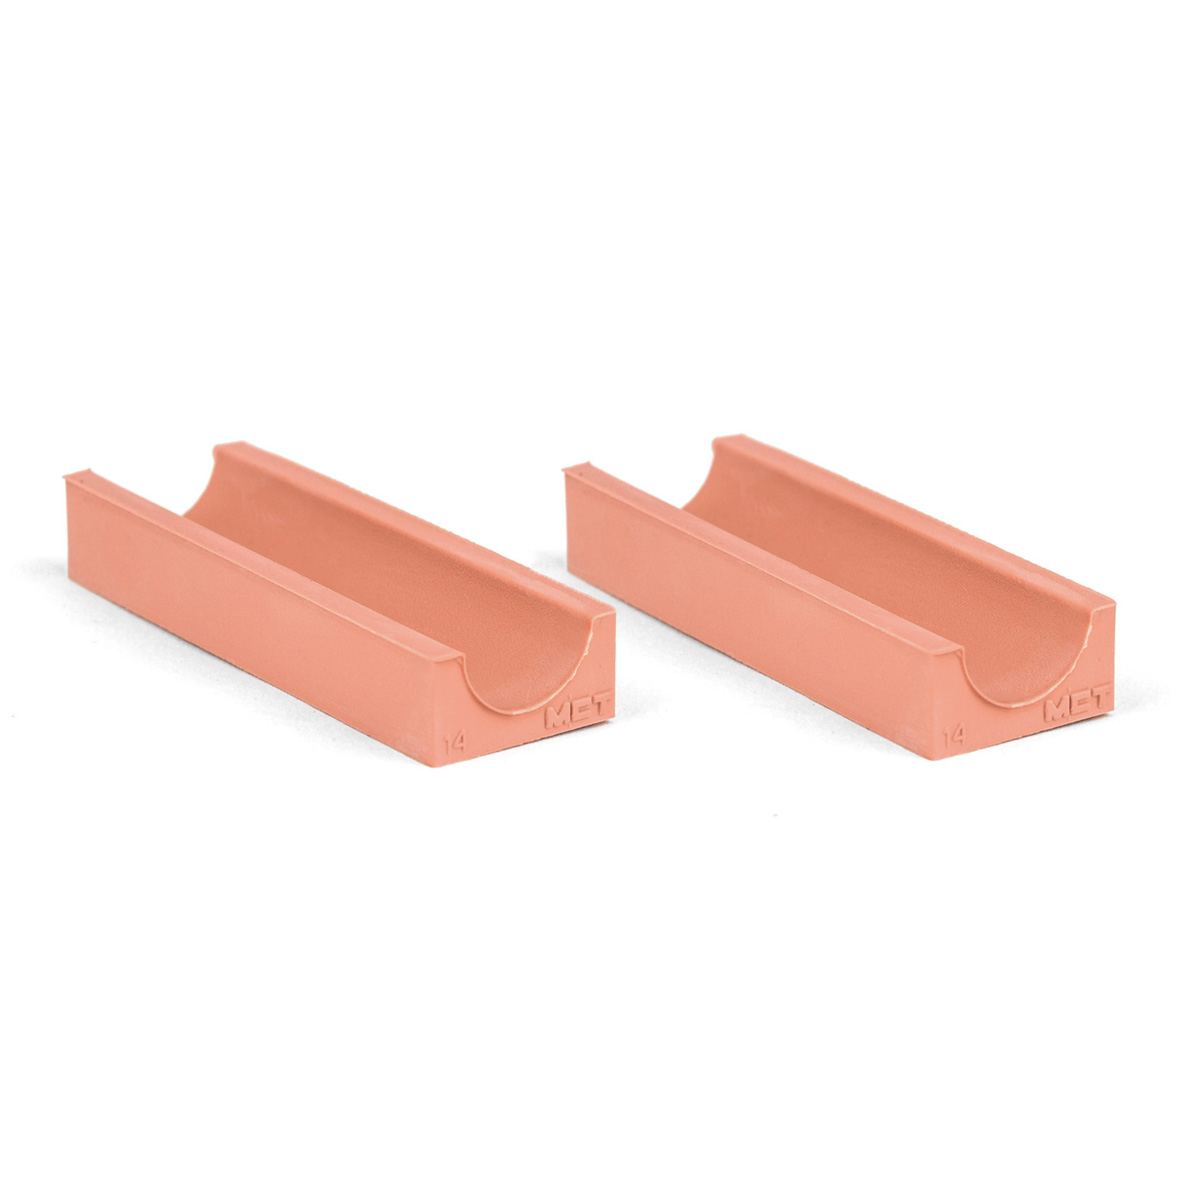 20-14*2 Set of 2 half insert block lycron 30mm, 20-14 for cable/pipe diam. 13.5-14.5mm